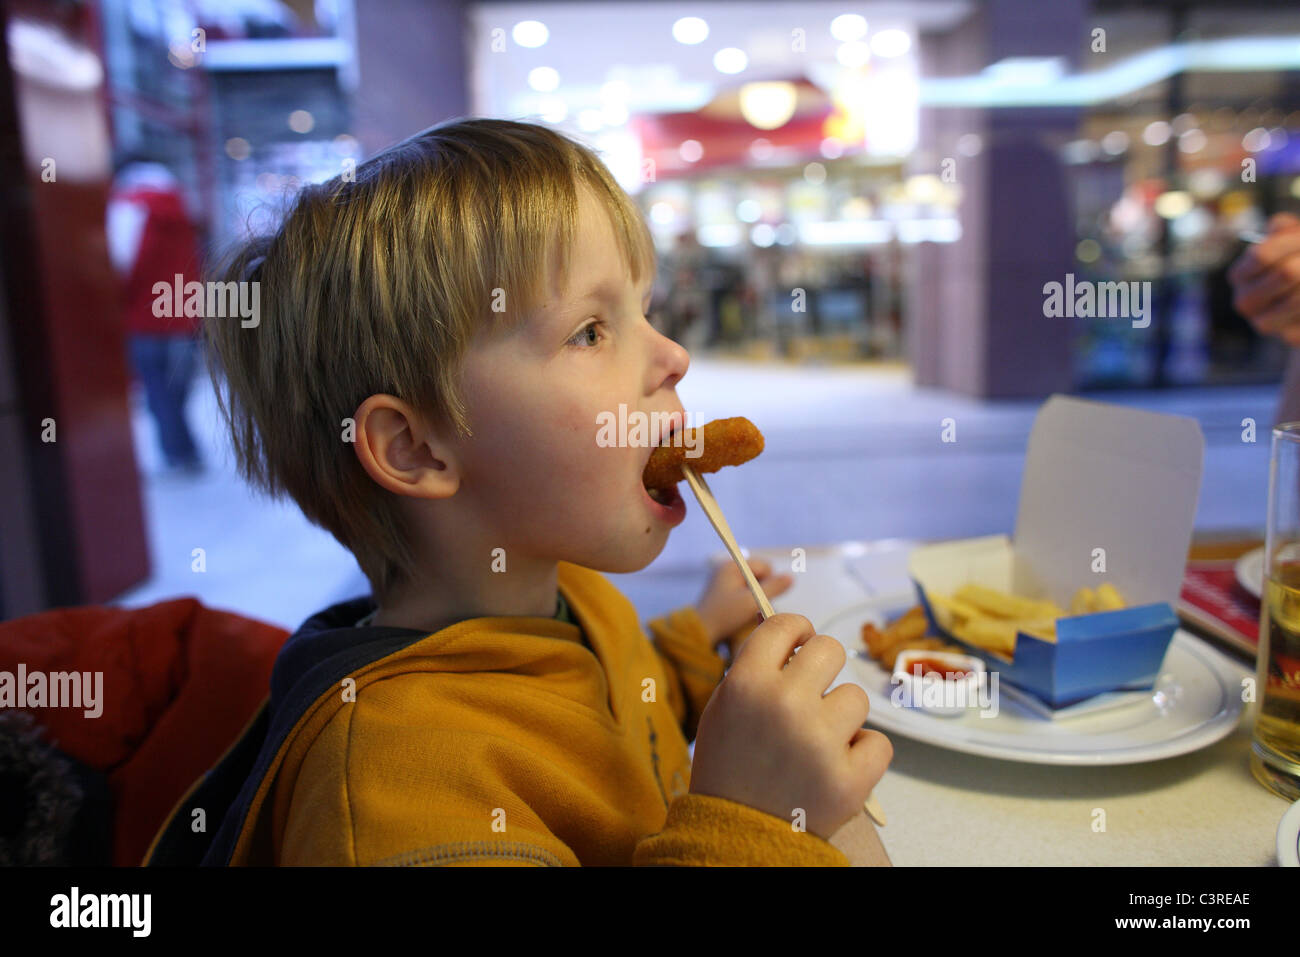 A child eating in a fast food restaurant Stock Photo